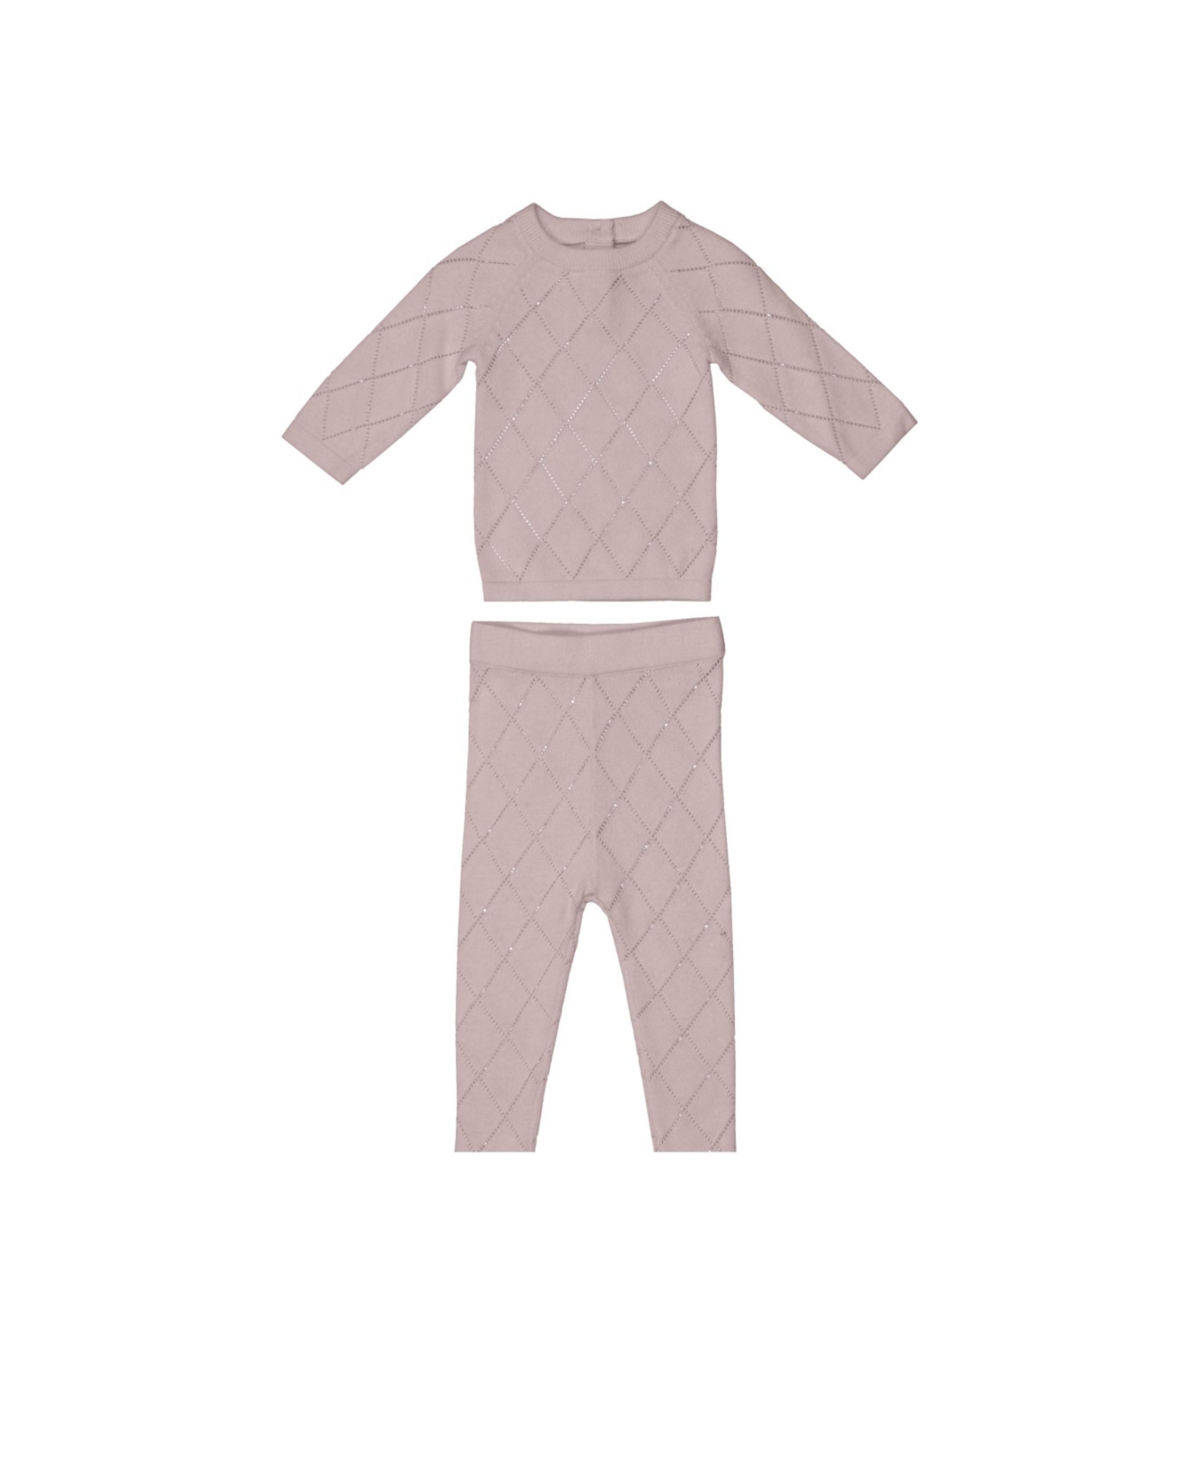 MANIERE BABY GIRLS NOOVEL KNIT TOP AND FOOTED PANTS, 2 PIECE SET